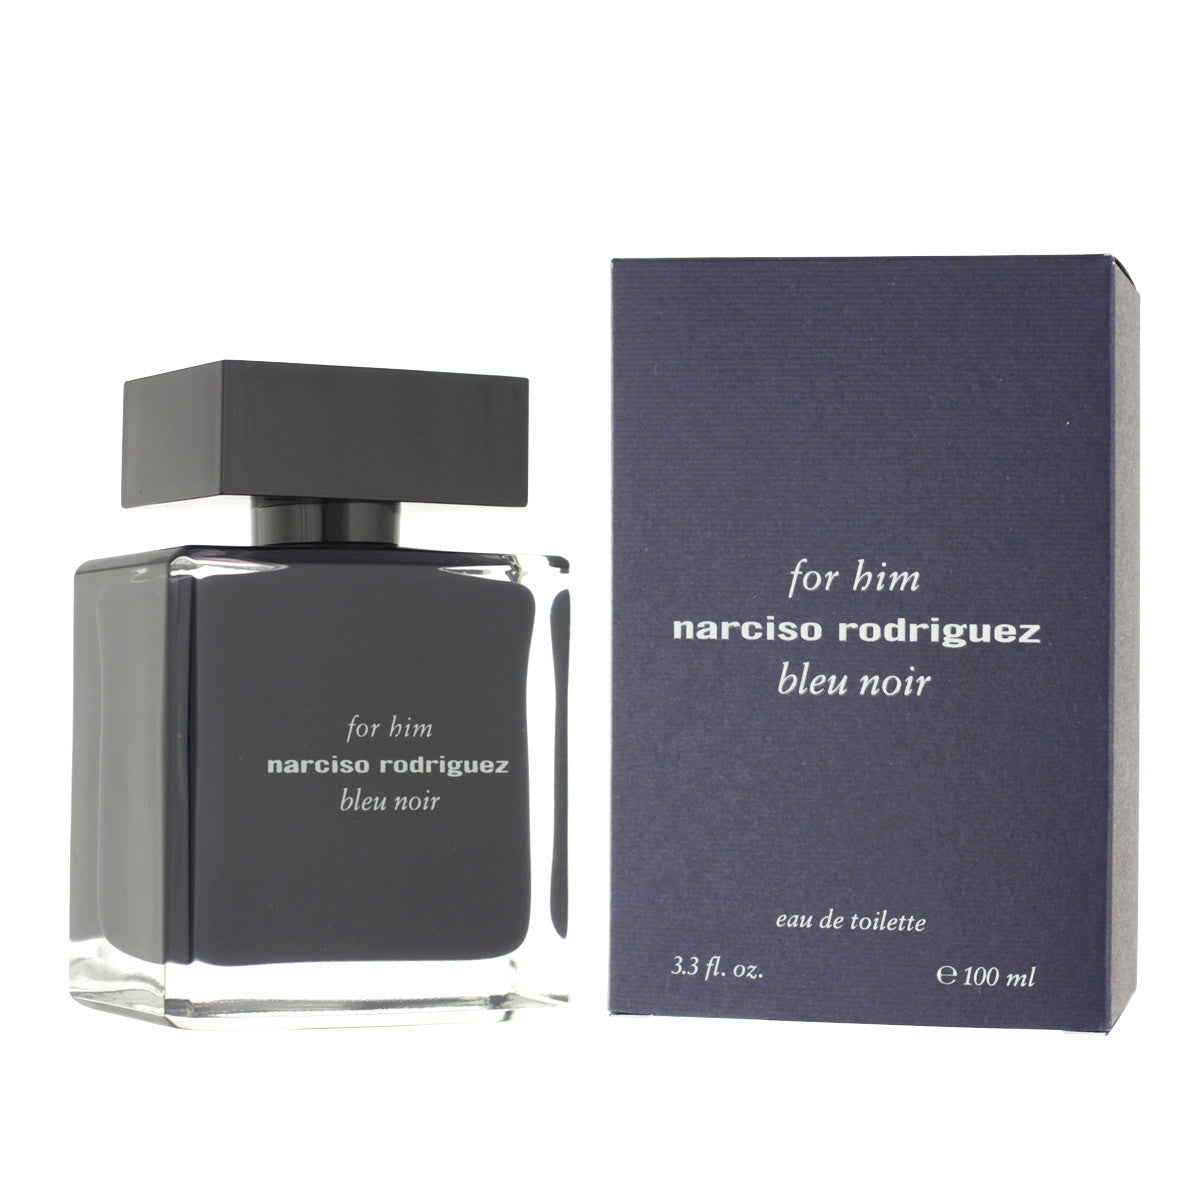 Narciso rodriguez for him bleu. Narciso Rodriguez for him bleu Noir Parfum. Narciso Rodriguez bleu Noir extreme 100 мл духи мужские. Narciso Rodriguez for him 100ml тестер. Narciso Rodriguez Narciso Rodriguez for him 100 мл.